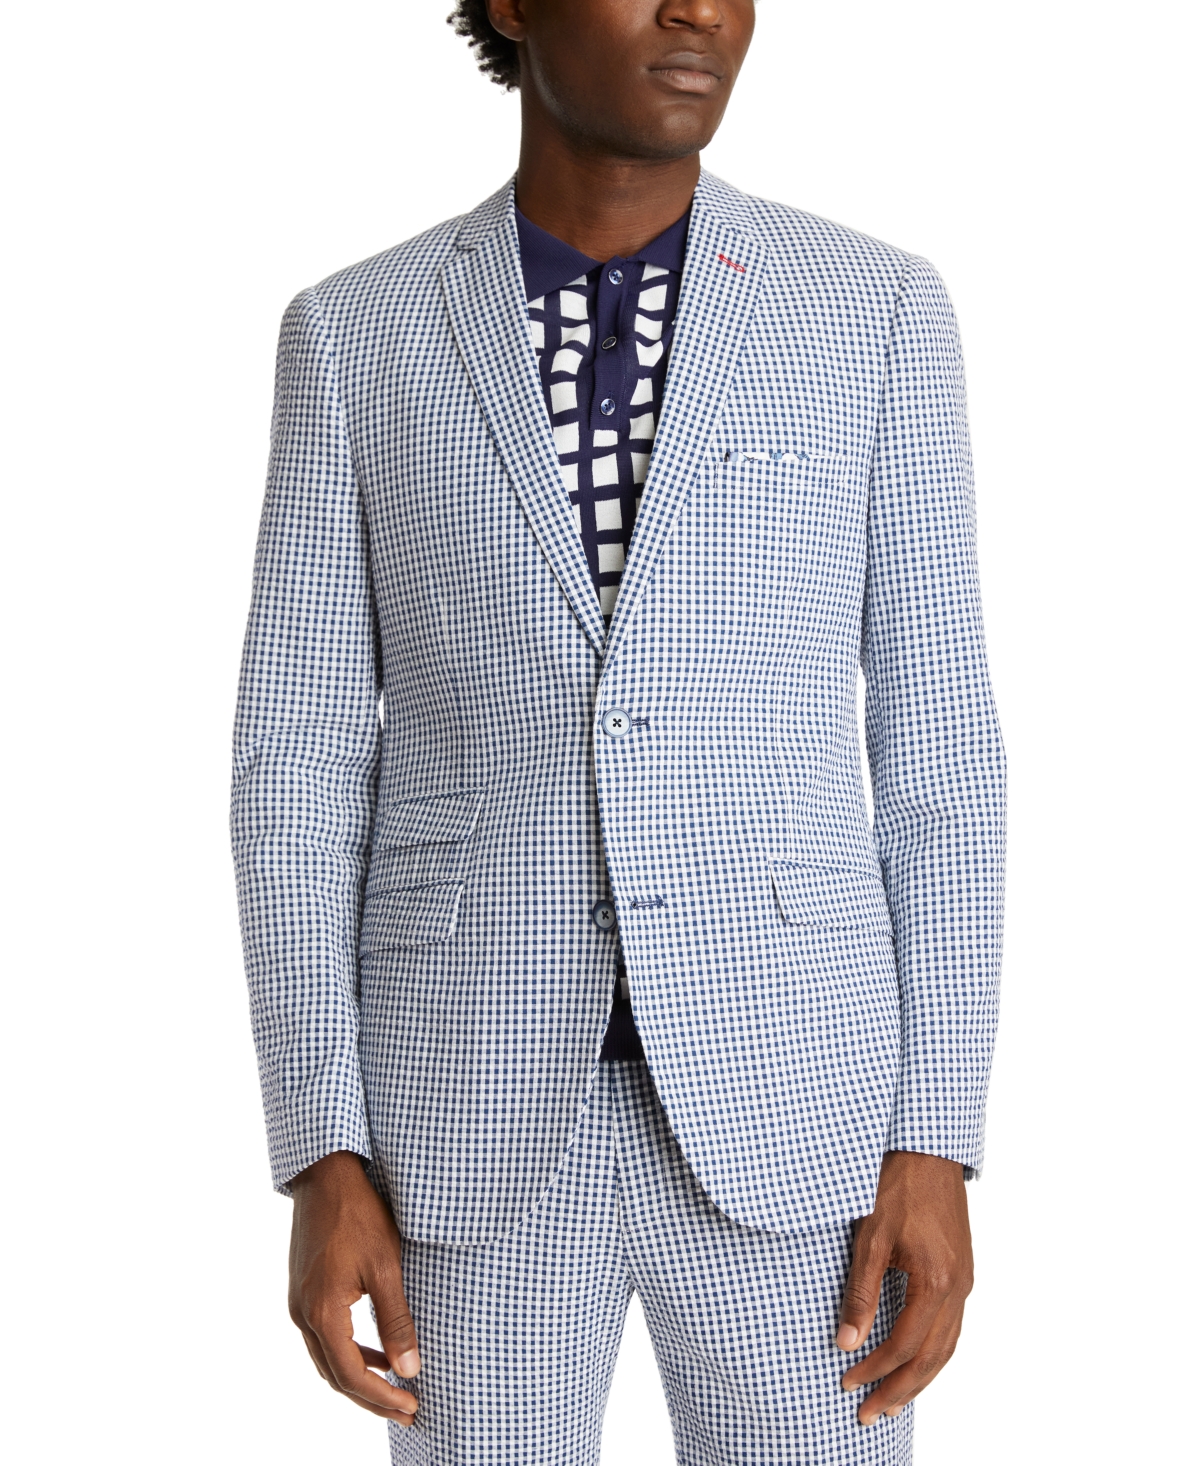 Paisley & Gray Men's Slim-fit Navy/white Gingham Check Suit Separate Jacket In Navy White Gingham